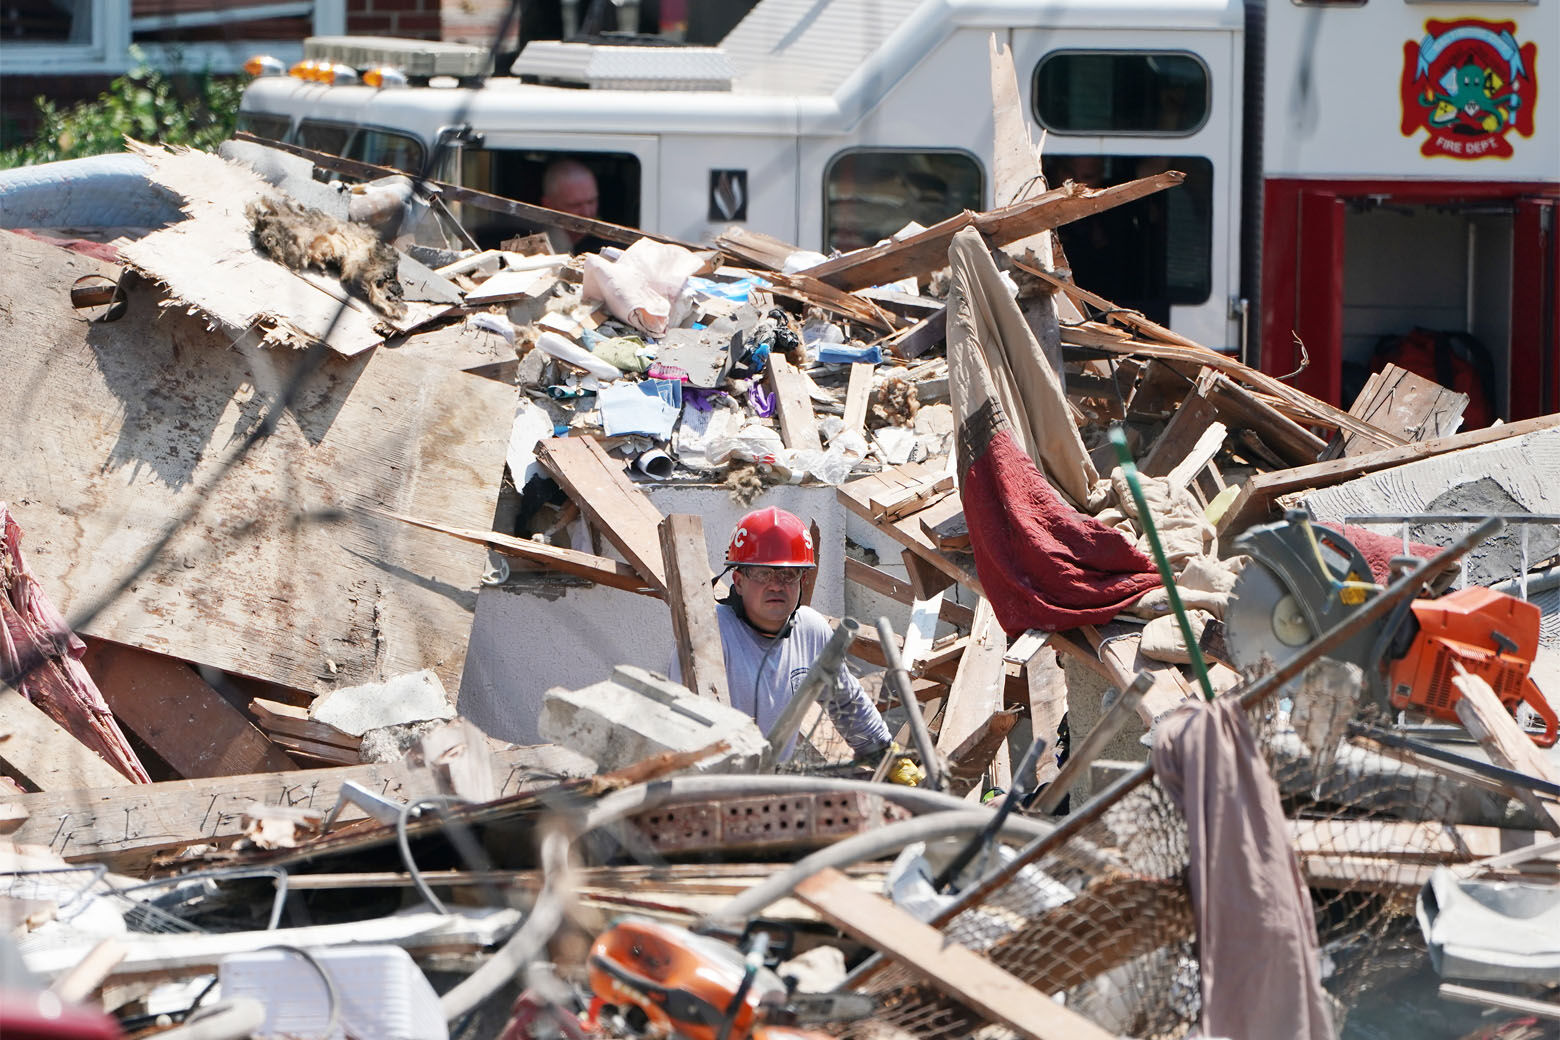 BALTIMORE, MARYLAND - AUGUST 10: A first responder digs through the rubble of three houses demolished by a gas explosion on August 10, 2020 in Baltimore, Maryland. A gas leak caused the massive explosion that leveled three homes, causing multiple injuries and at least one fatality. (Photo by J. Countess/Getty Images)